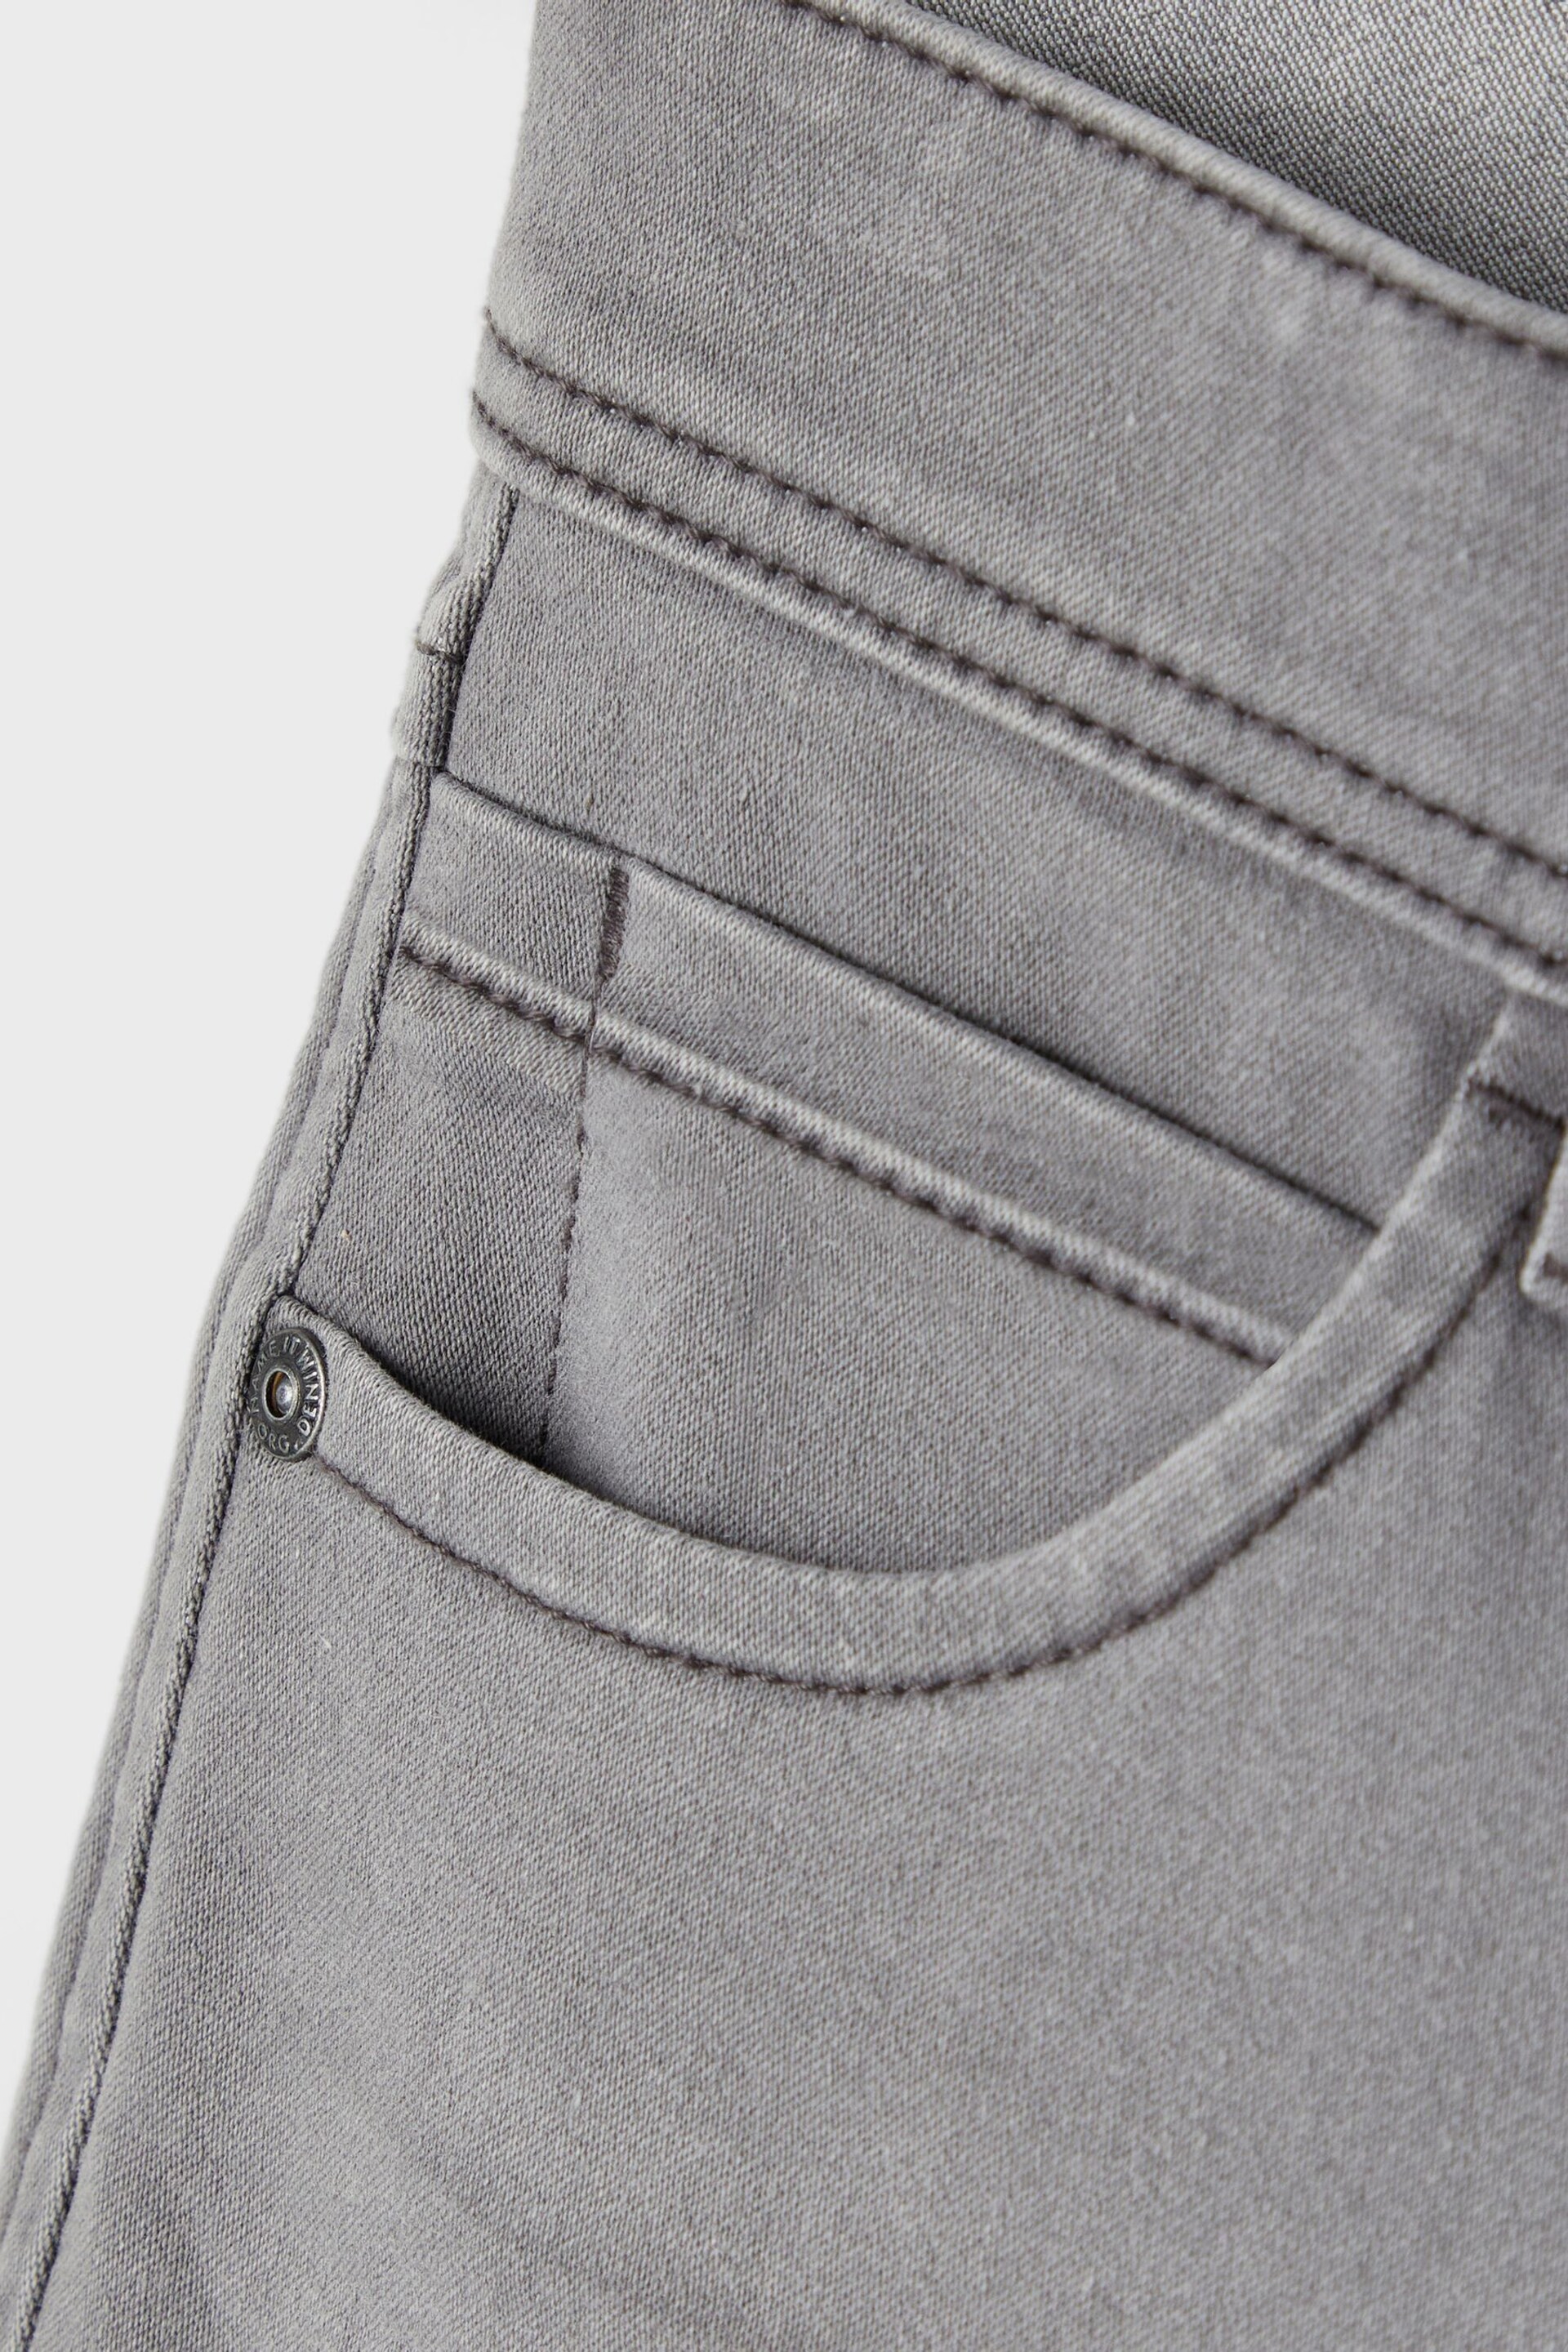 Name It Grey Boys Slim Fit Jeans - Image 6 of 6